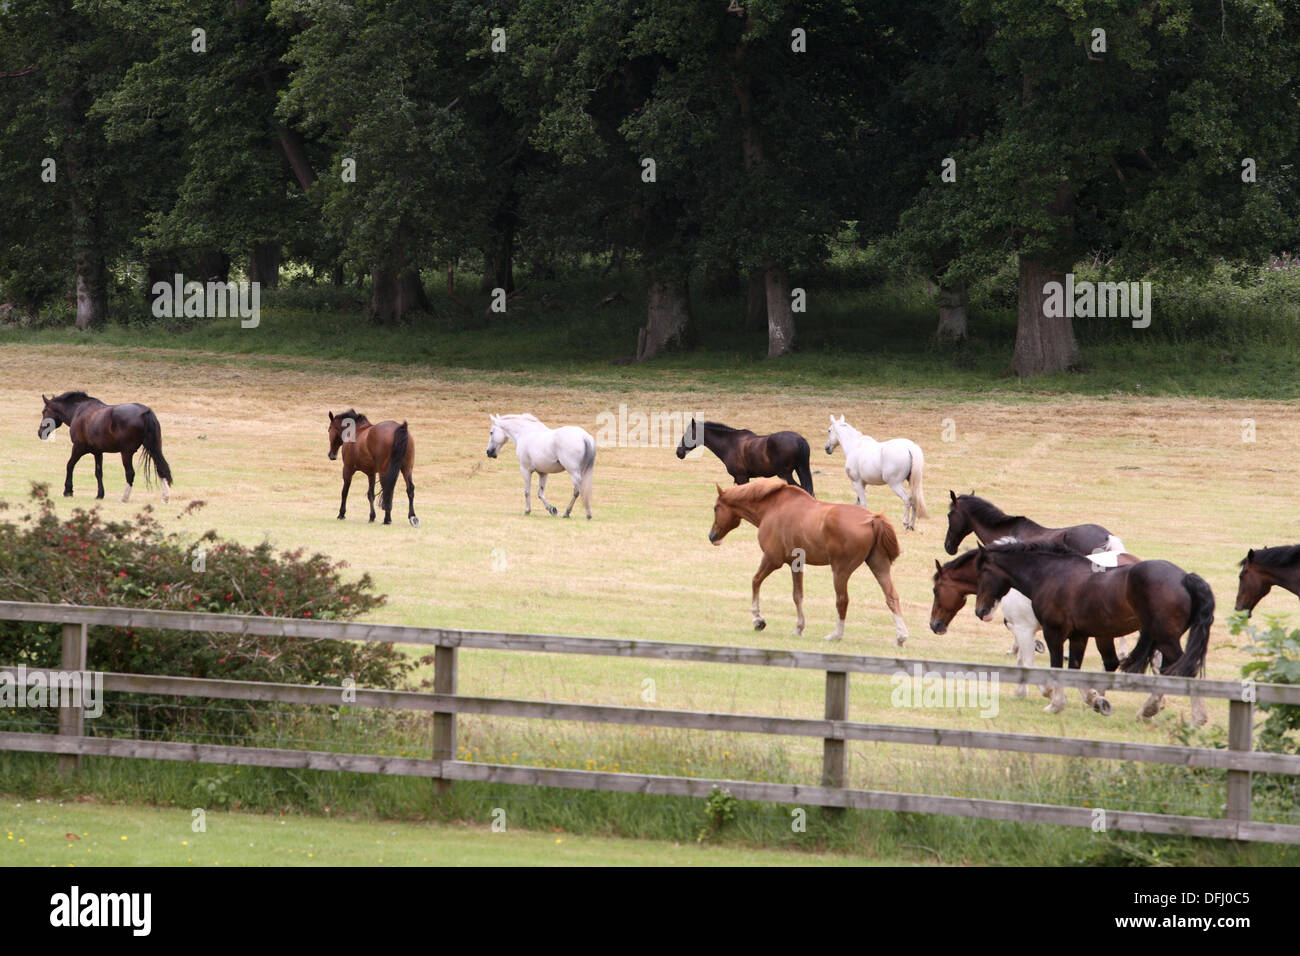 Horse roaming free in a field Stock Photo